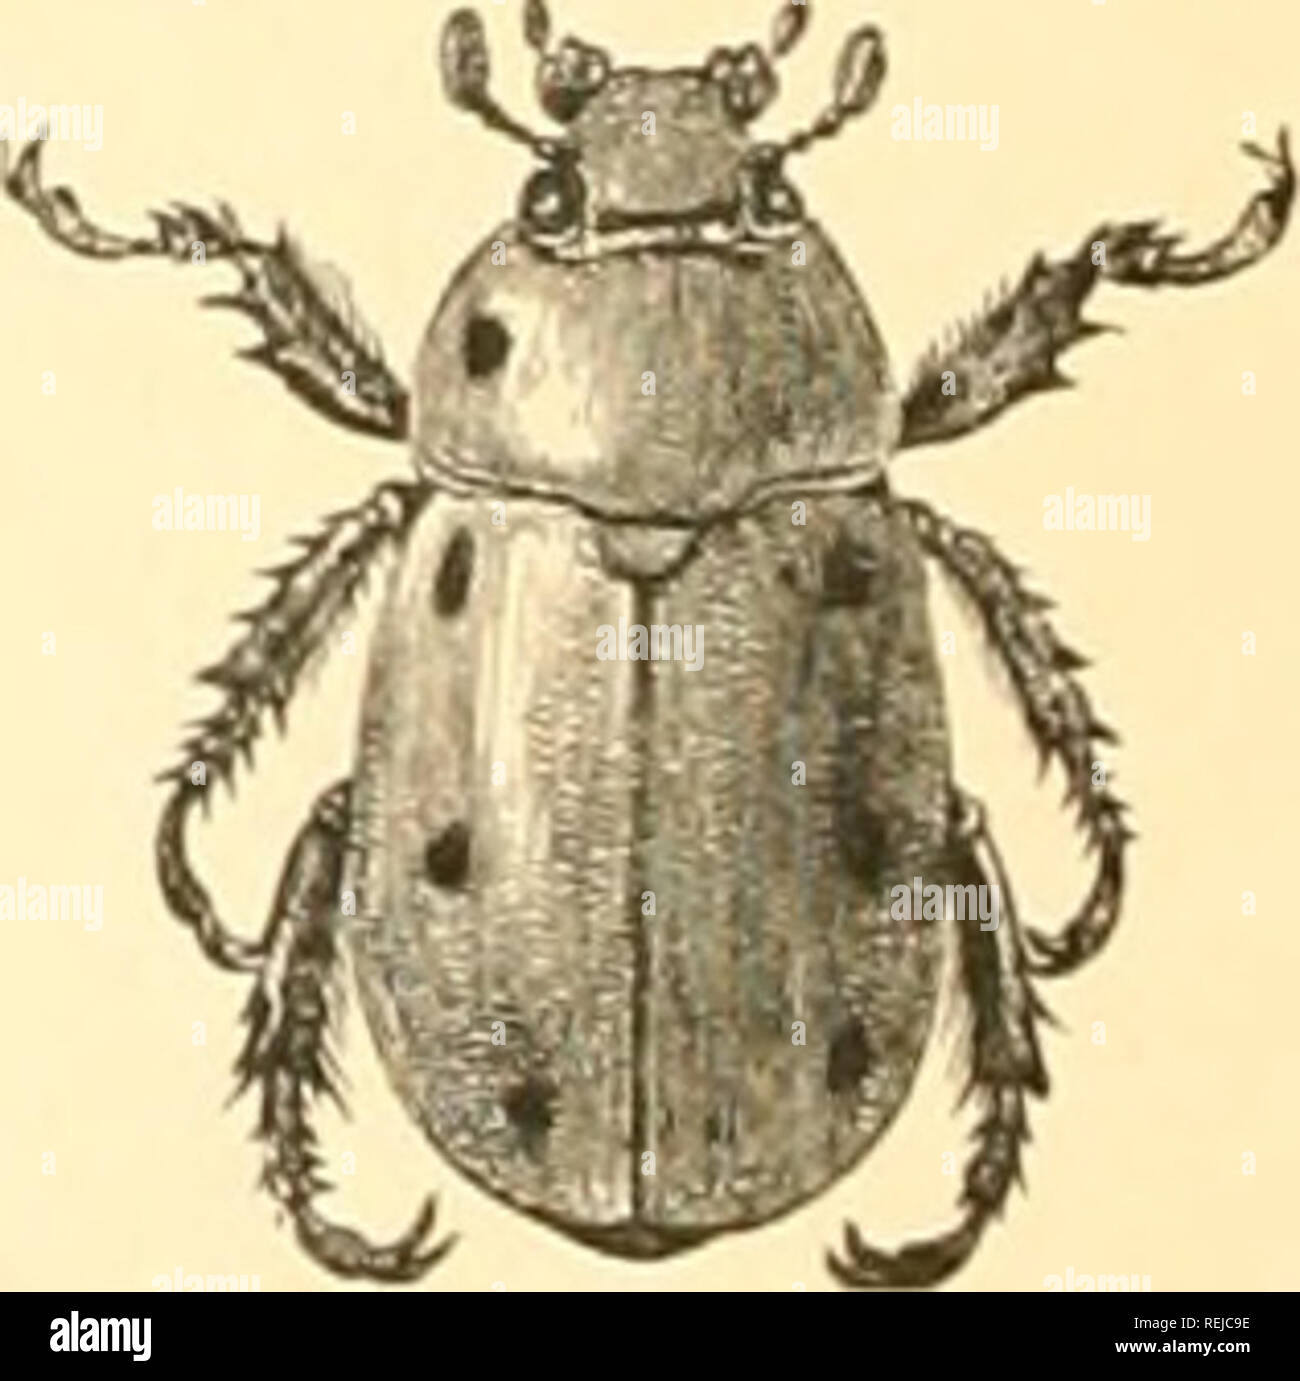 . Coleoptera. Beetles. Fig. 4l'1). â Oryctes nas The genera Strategus, JTi/lori/ctcs, and Oryctes comprise species iiot quite as large as those of tlie foregoing genera, having horns or tubercles on Ijotli sexes, and with the anterior feet not elongated. In Strategus, the jii-othorax usually has three horns in the males and three tubercles in the females, .s'. a/itceus, a shining dark-brown species about an inch in length, is found near the Atlantic coast of the United States as far north as Massachusetts. In Xglorgctes, the head is horned in the males and tuberculate in the females. A' satgru Stock Photo